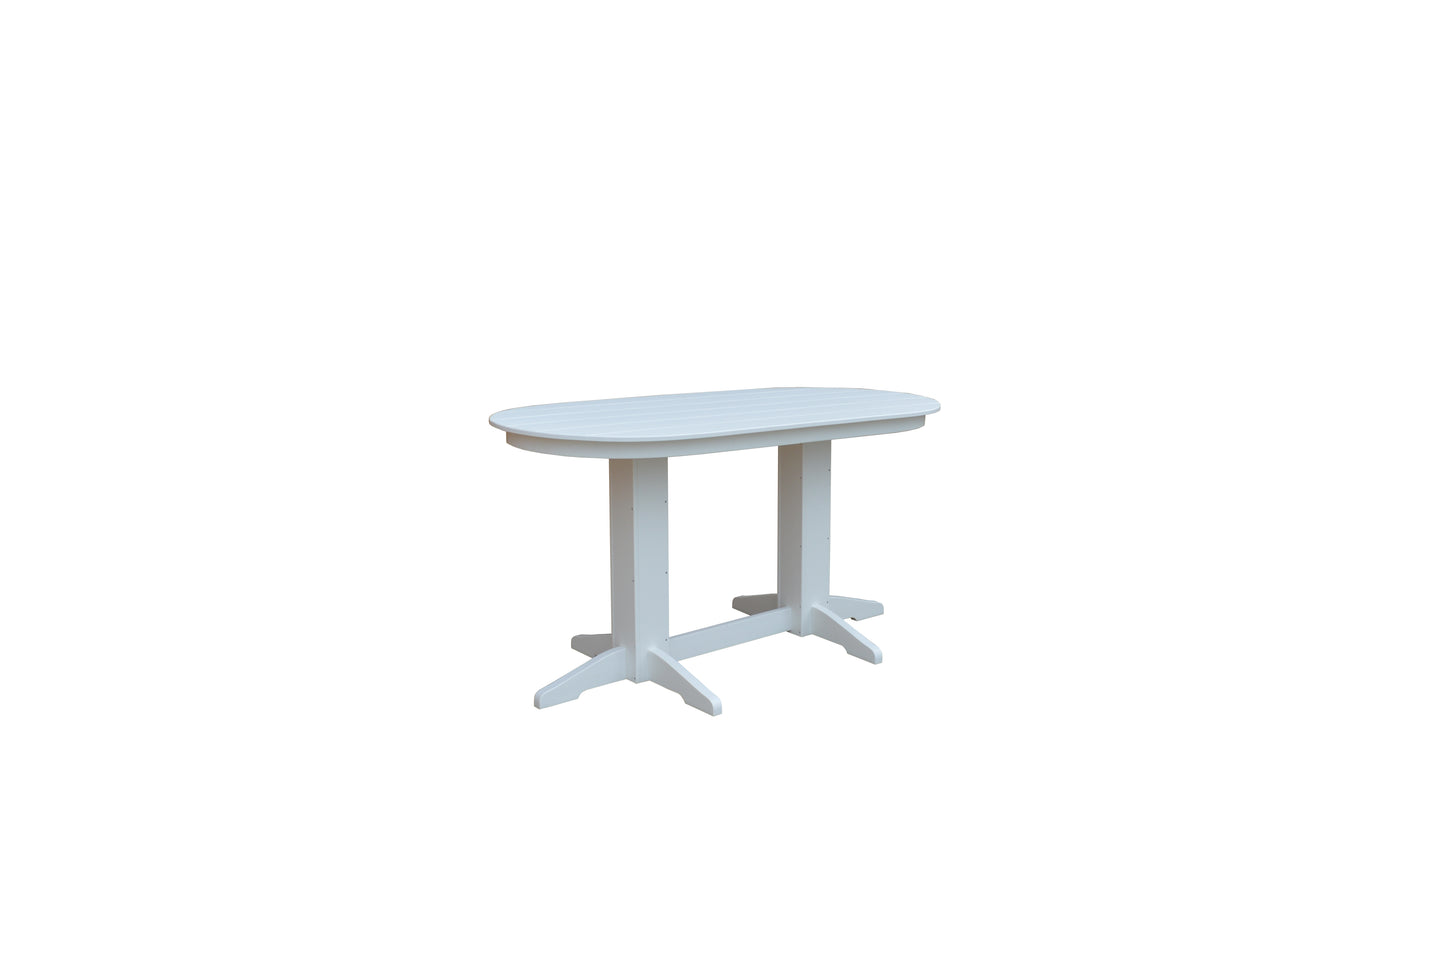 A&L Furniture Co. Recycled Plastic 5' Oval Table (Counter Height) - LEAD TIME TO SHIP 10 BUSINESS DAYS